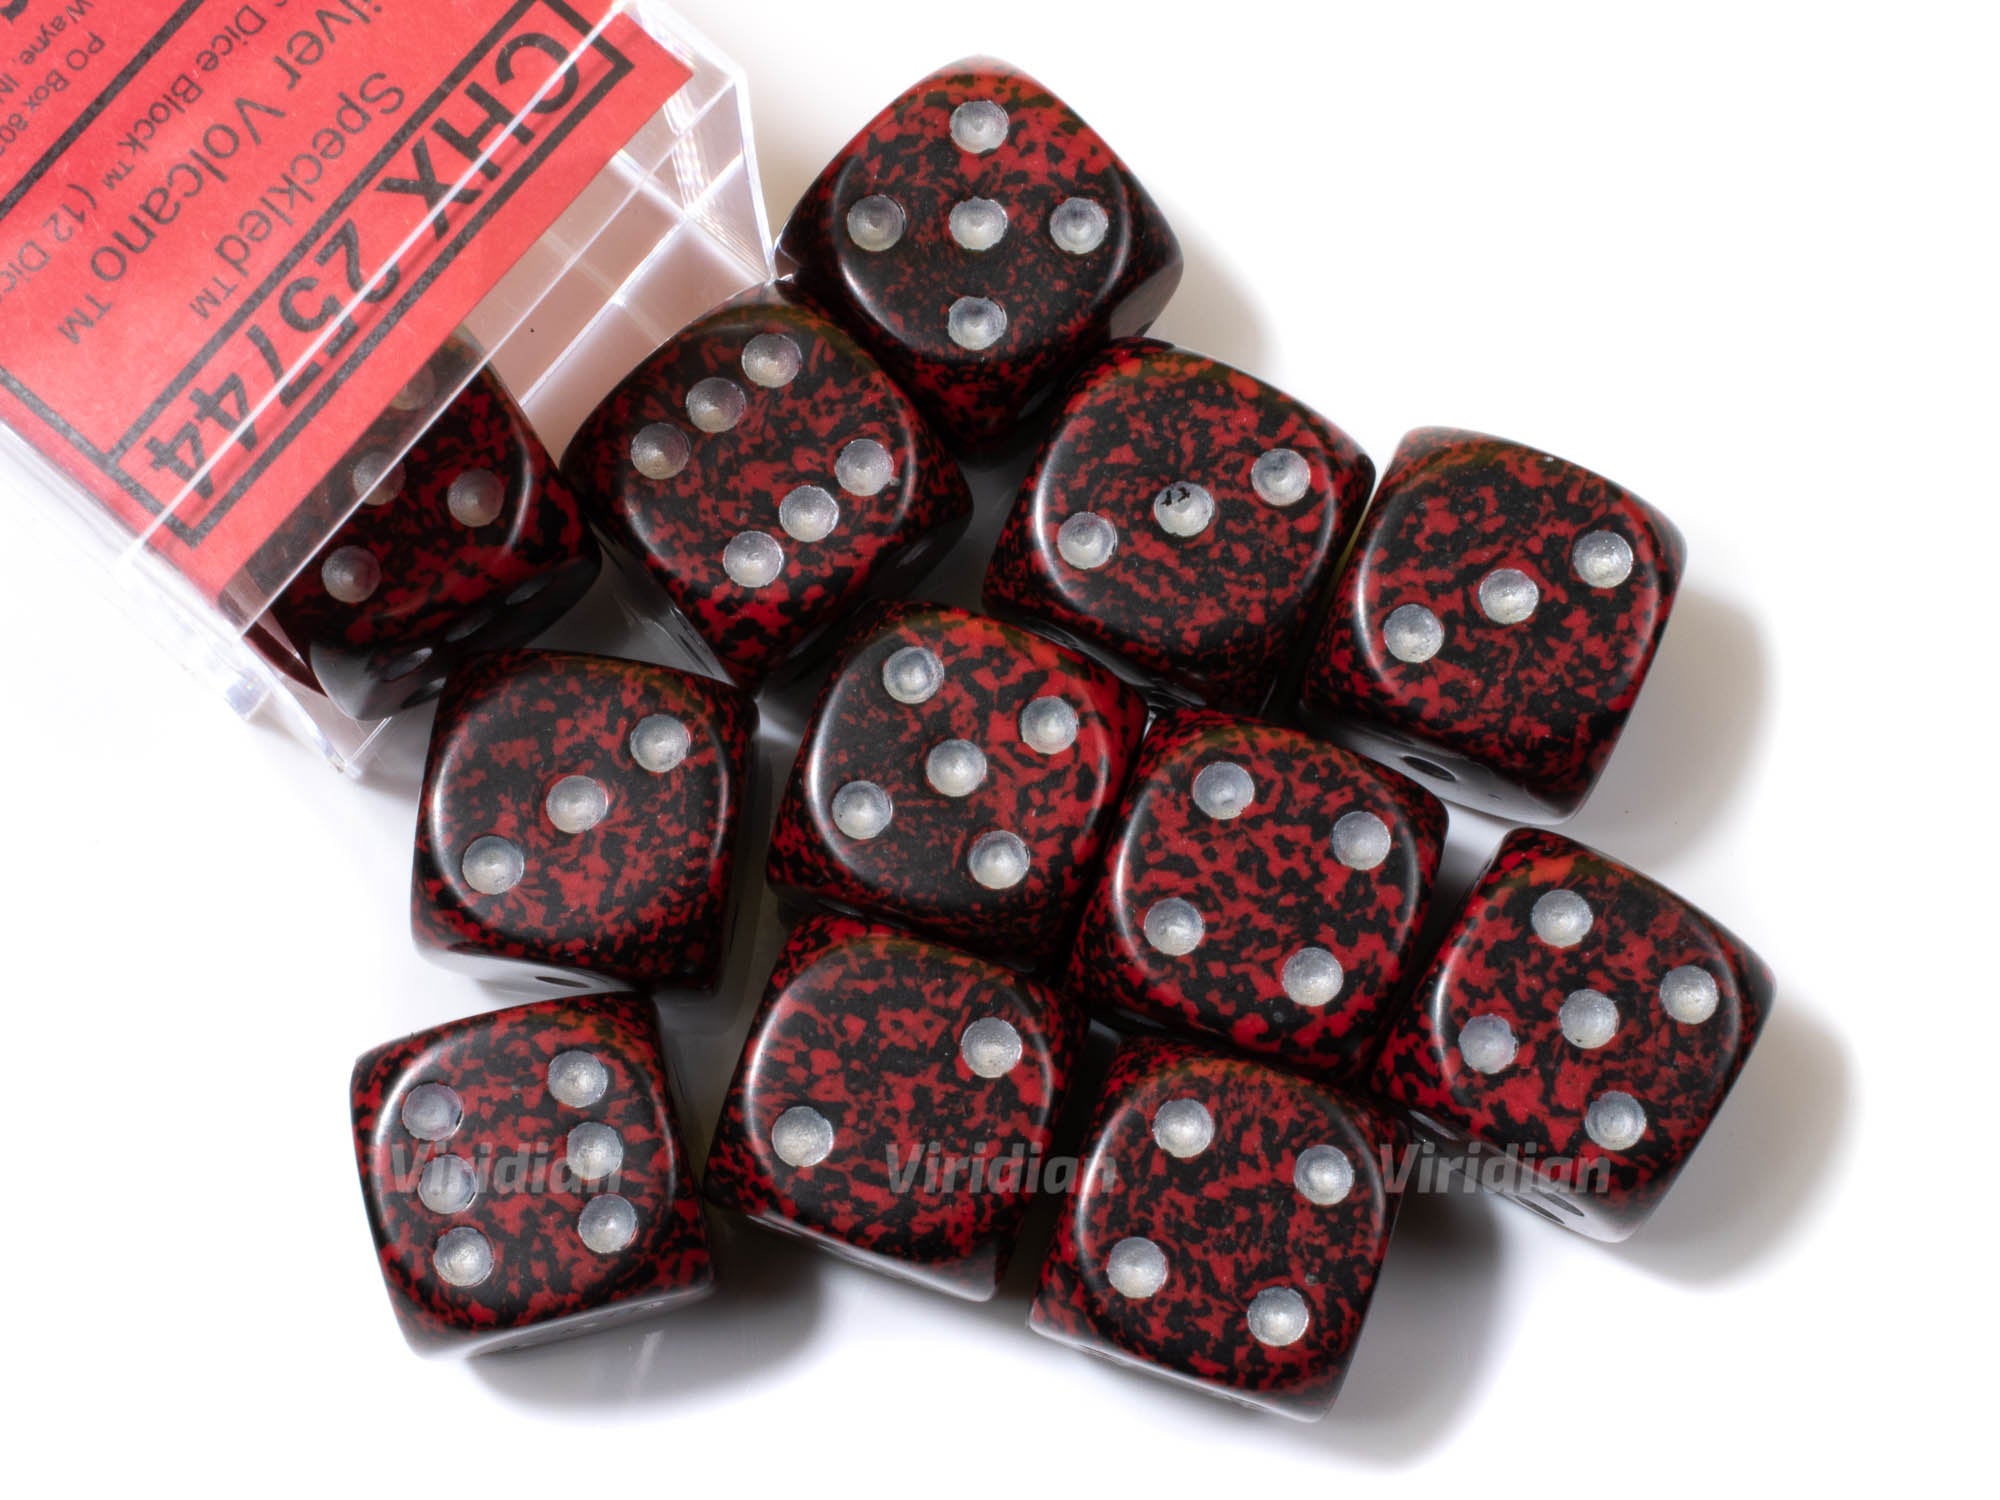 Speckled Silver Volcano | Black & Red | D6 Block | Chessex Dice (12)